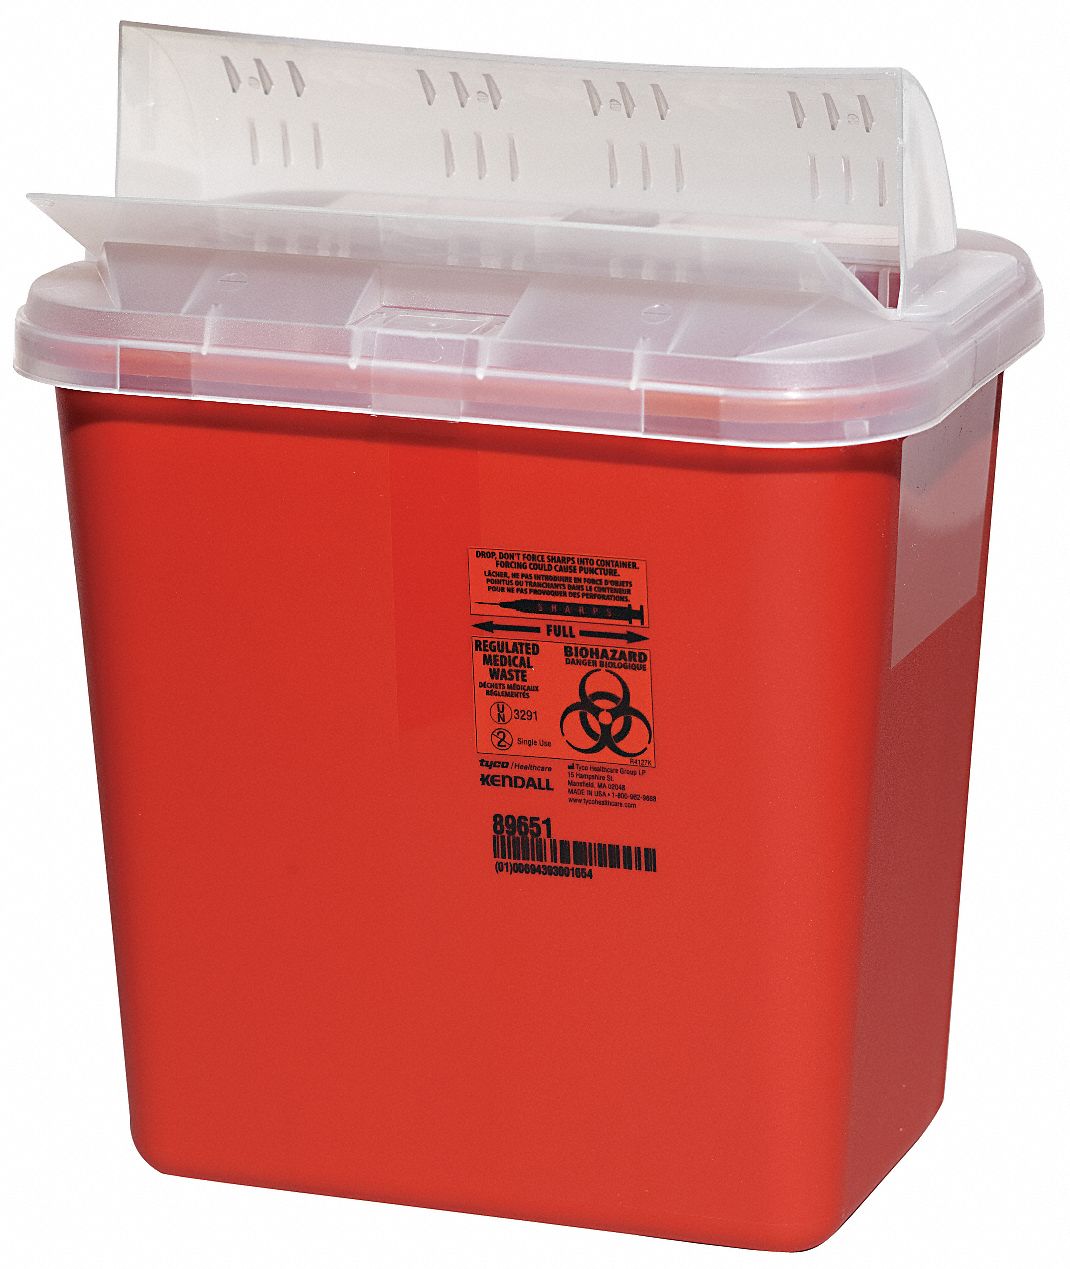 sharps container drop grainger covidien height containers length width horizontal plastic